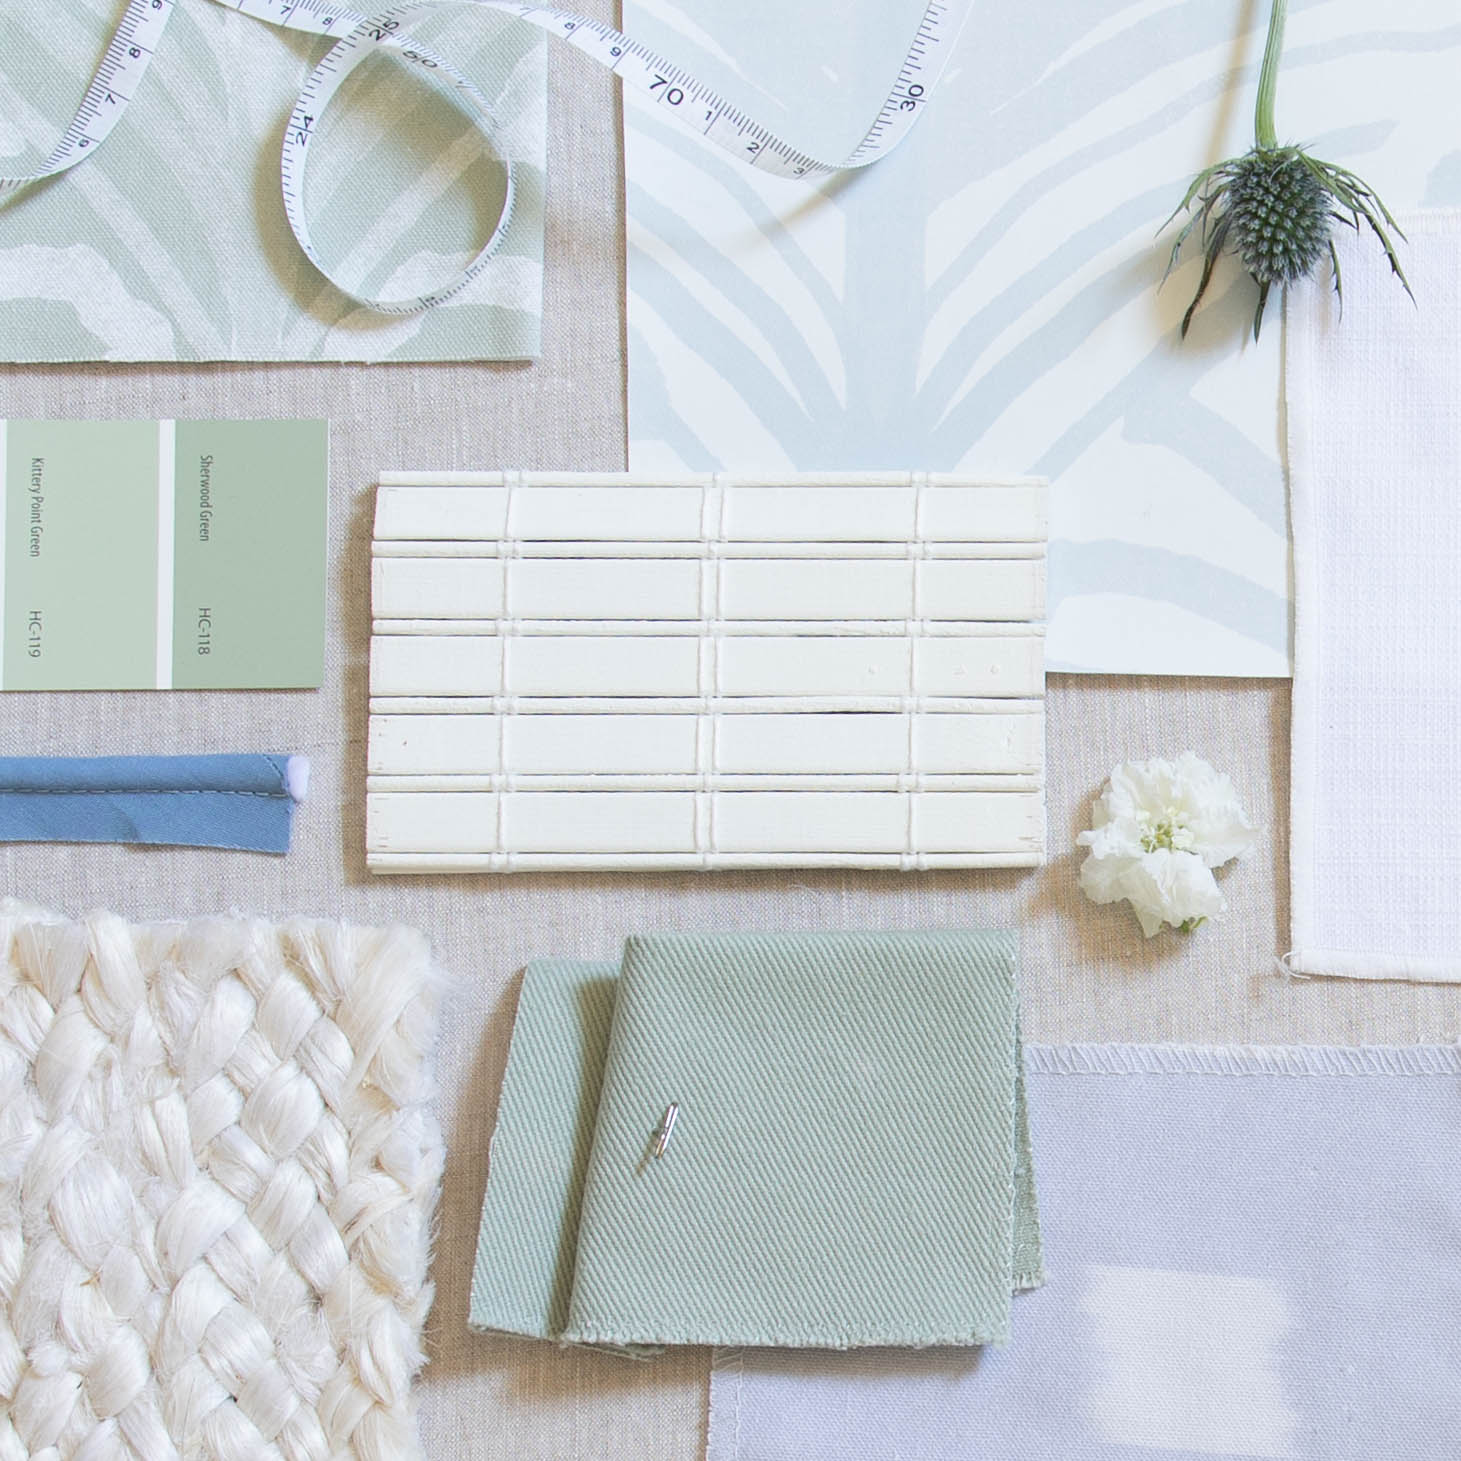 Interior design moodboard and fabric inspirations with Sage Green Swatch, Sky Blue Pattern Printed Swatch, Sage Green Palm Printed Swatch and Sky Blue Palm Printed Swatch